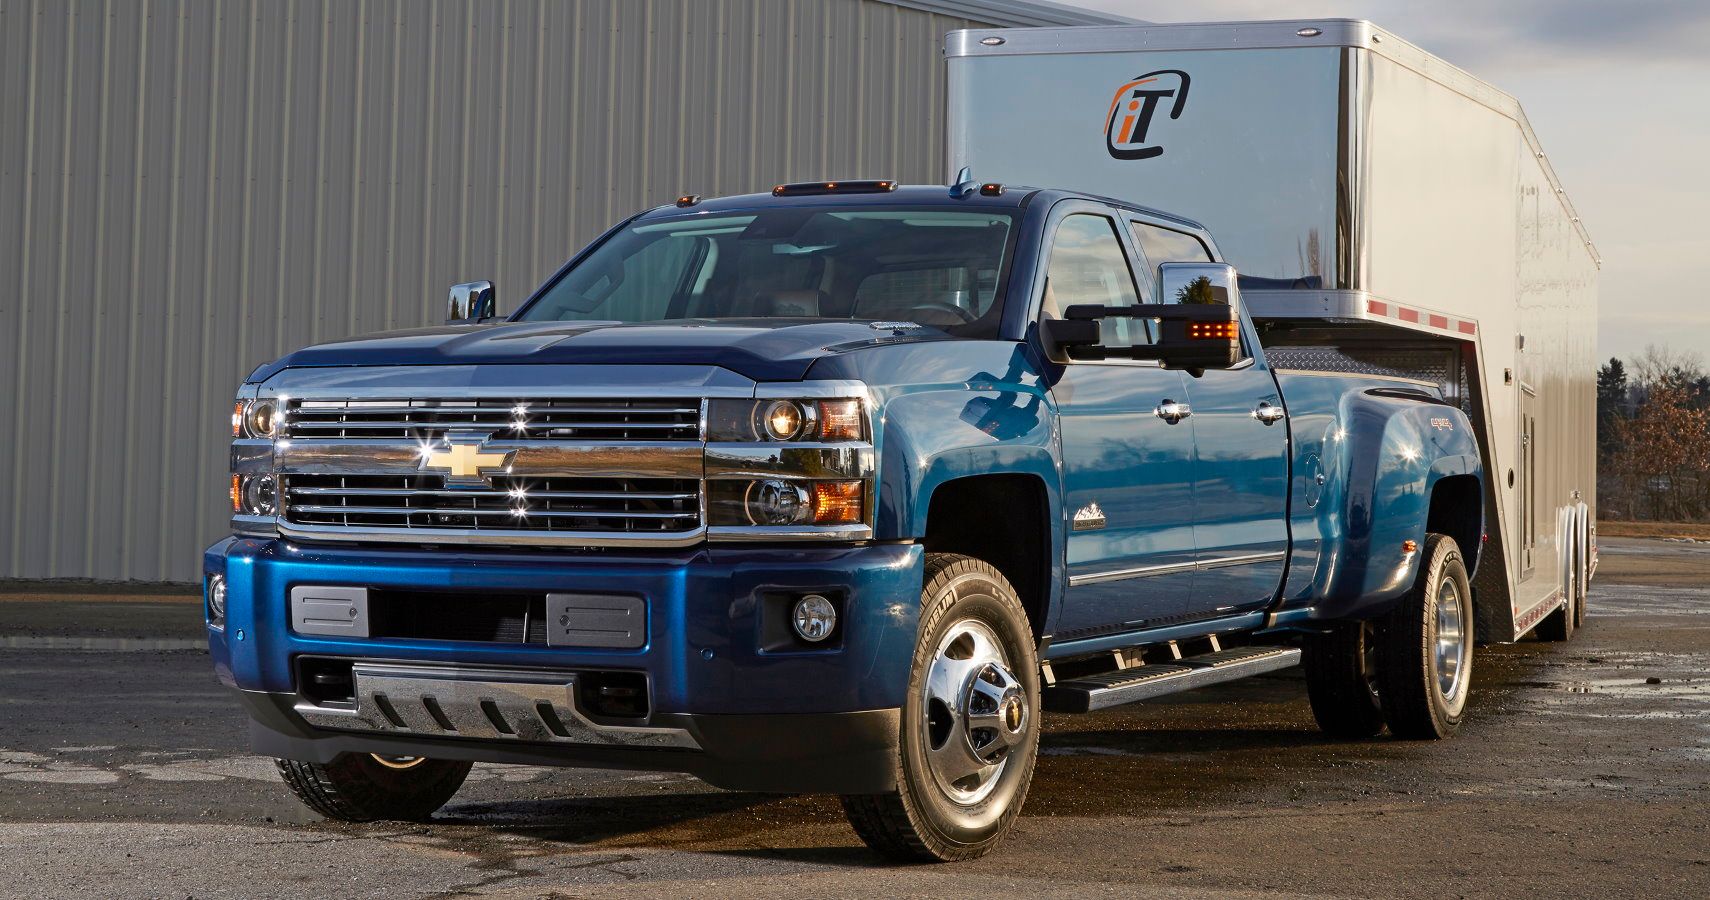 Chevrolet Accessories offers a trailering camera system, produced by Echomaster, for 2014-2016 model year Silverados. The system is fully integrated with the Silverado infotainment system, providing images from up to four cameras on the center display.